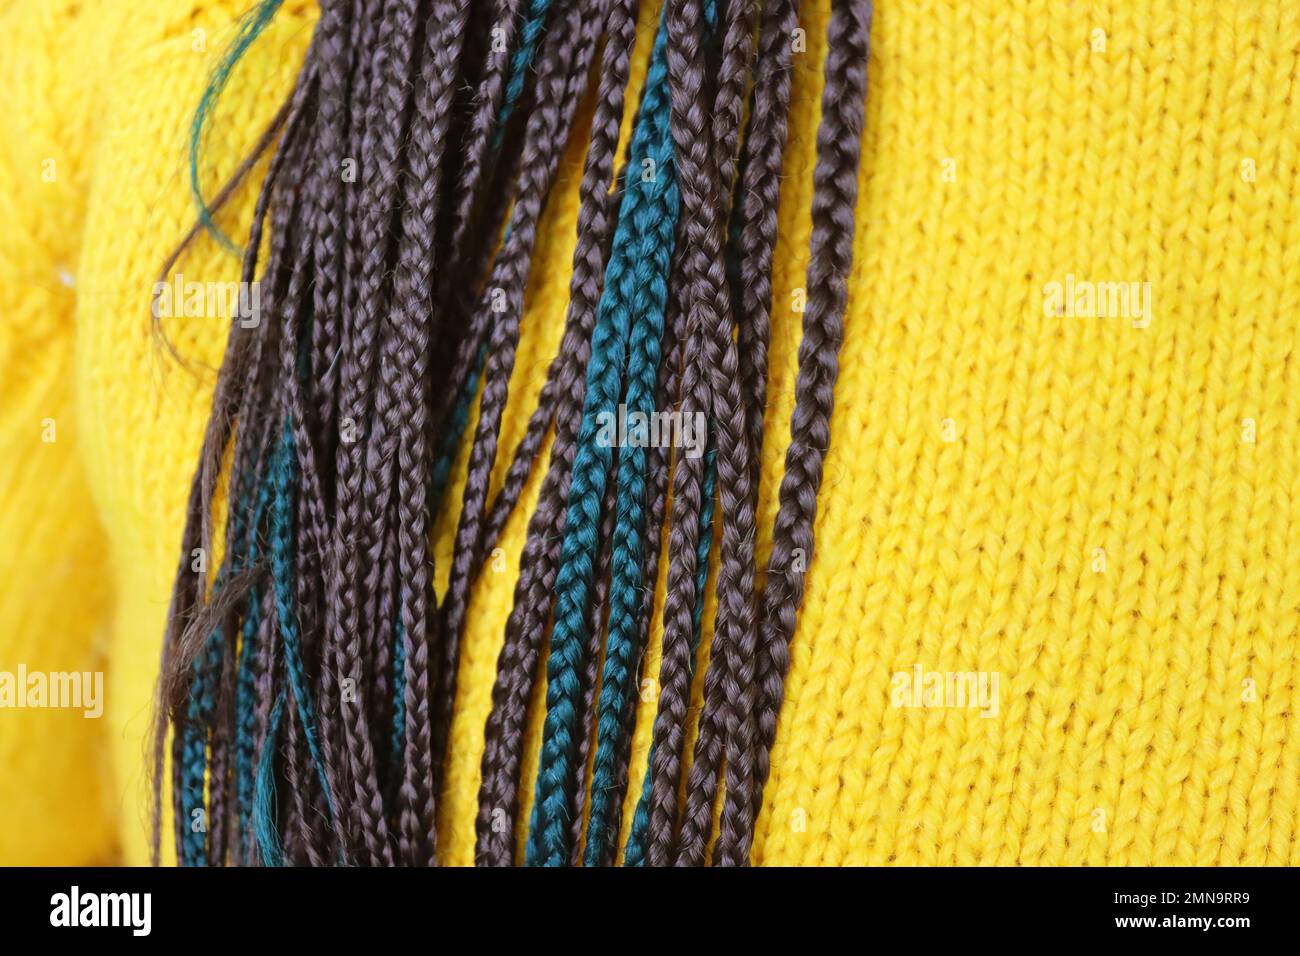 Girl with dreadlocks in a yellow sweater. Close up view Stock Photo